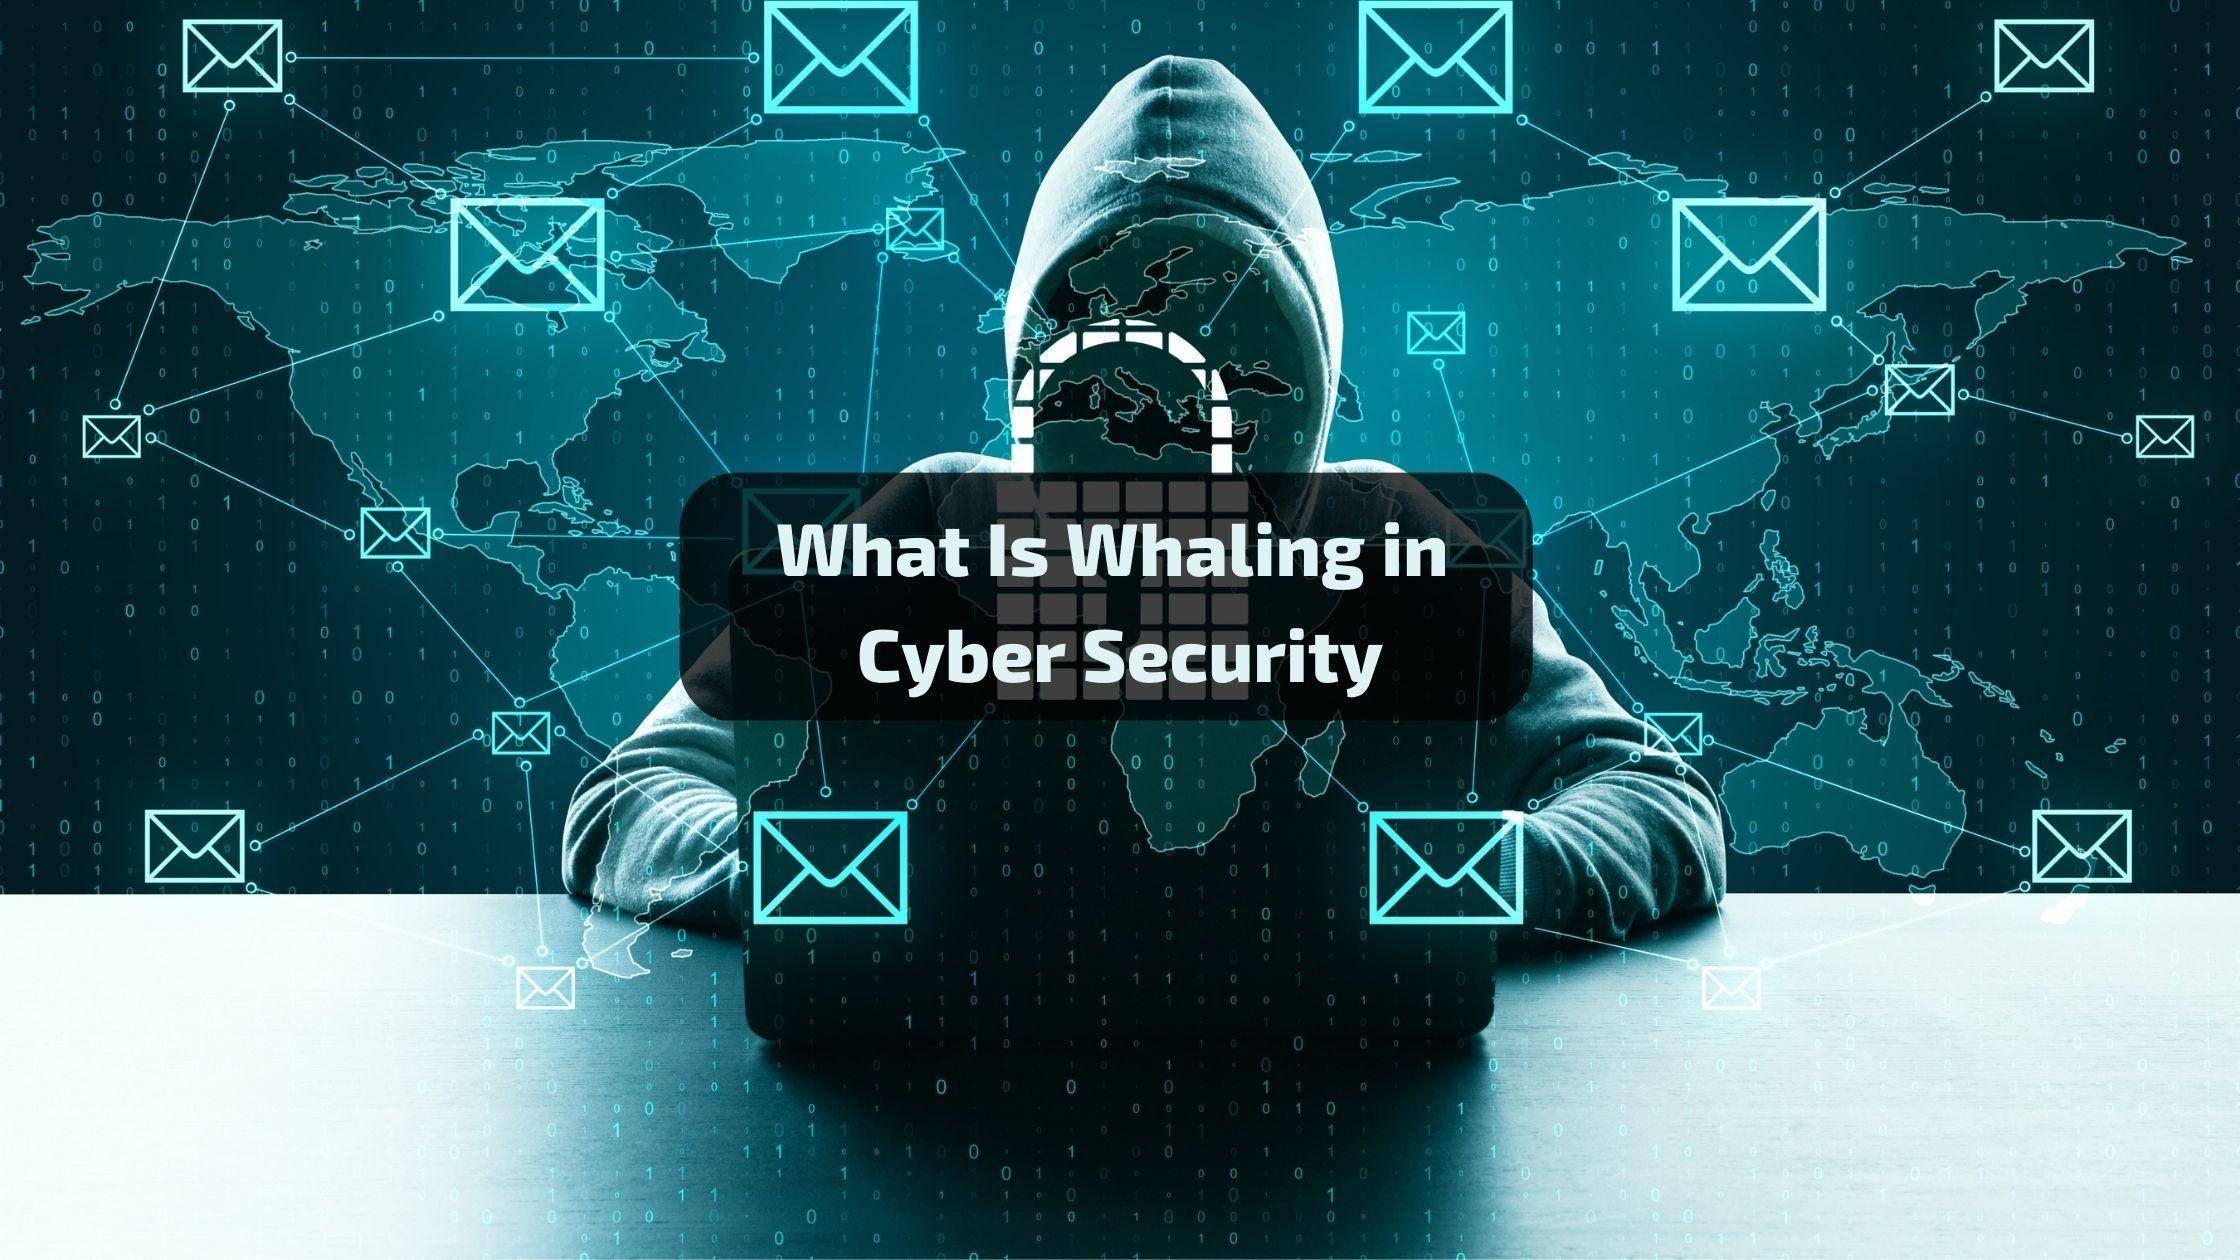 What is whaling in cyber security?